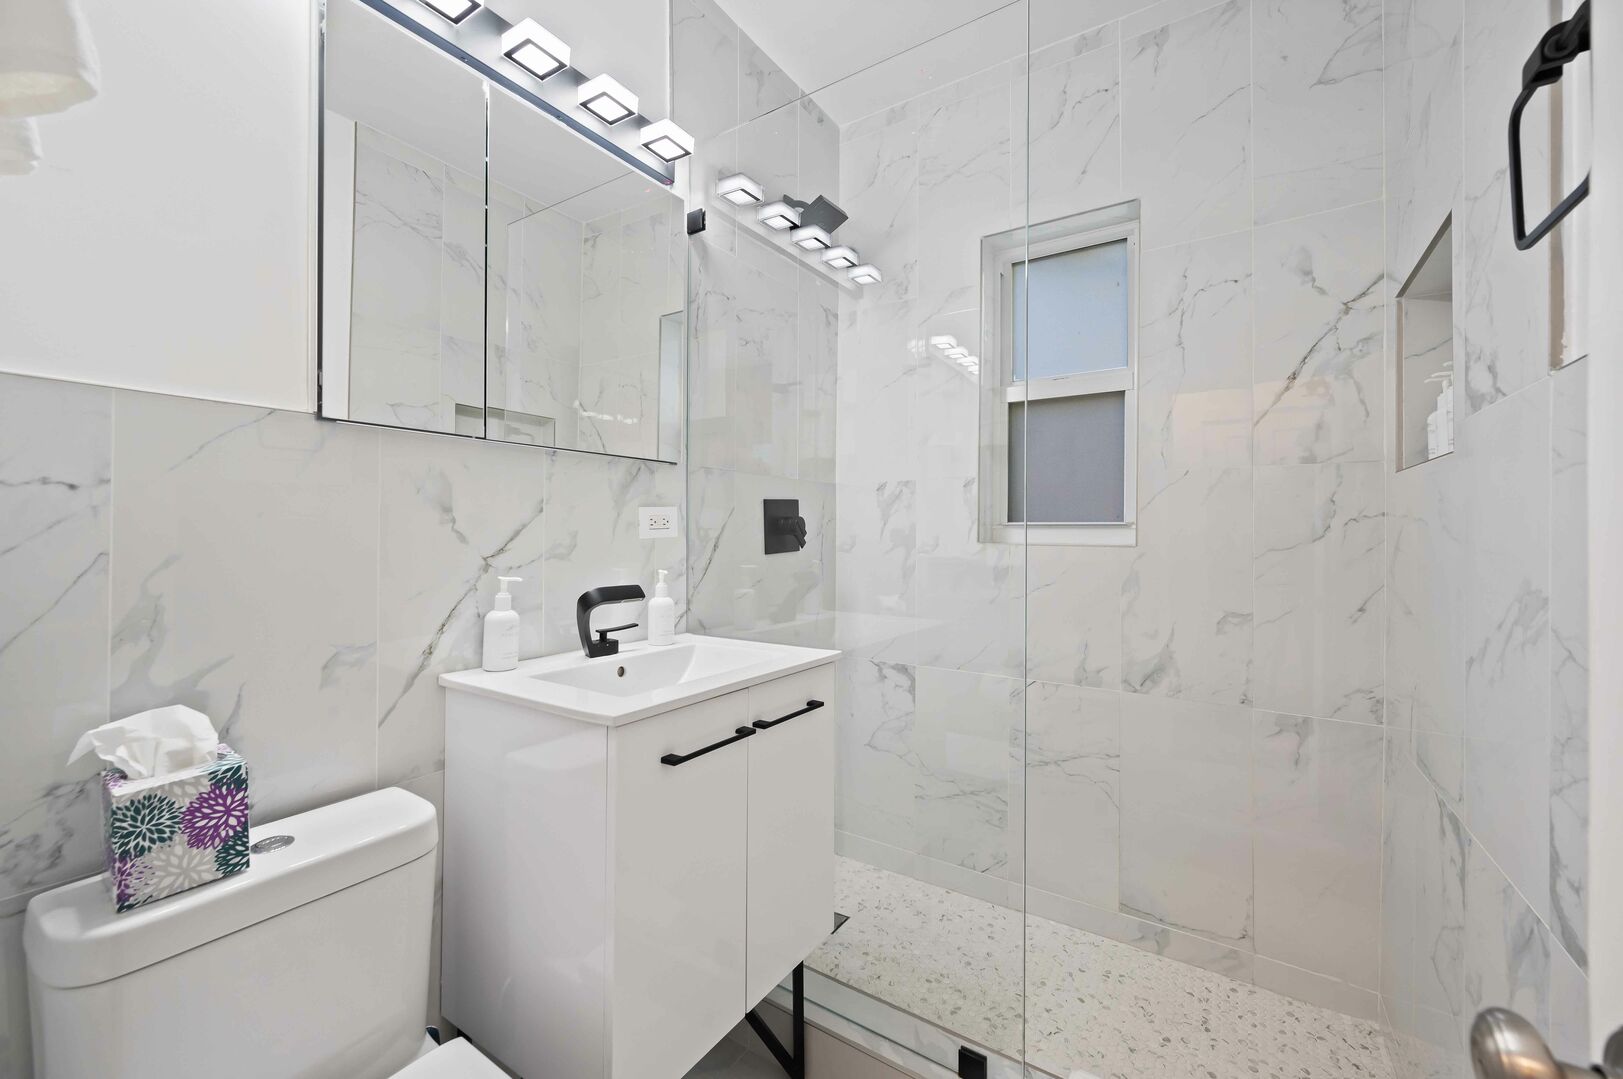 The black and white marbled bathroom features a walk-in shower.